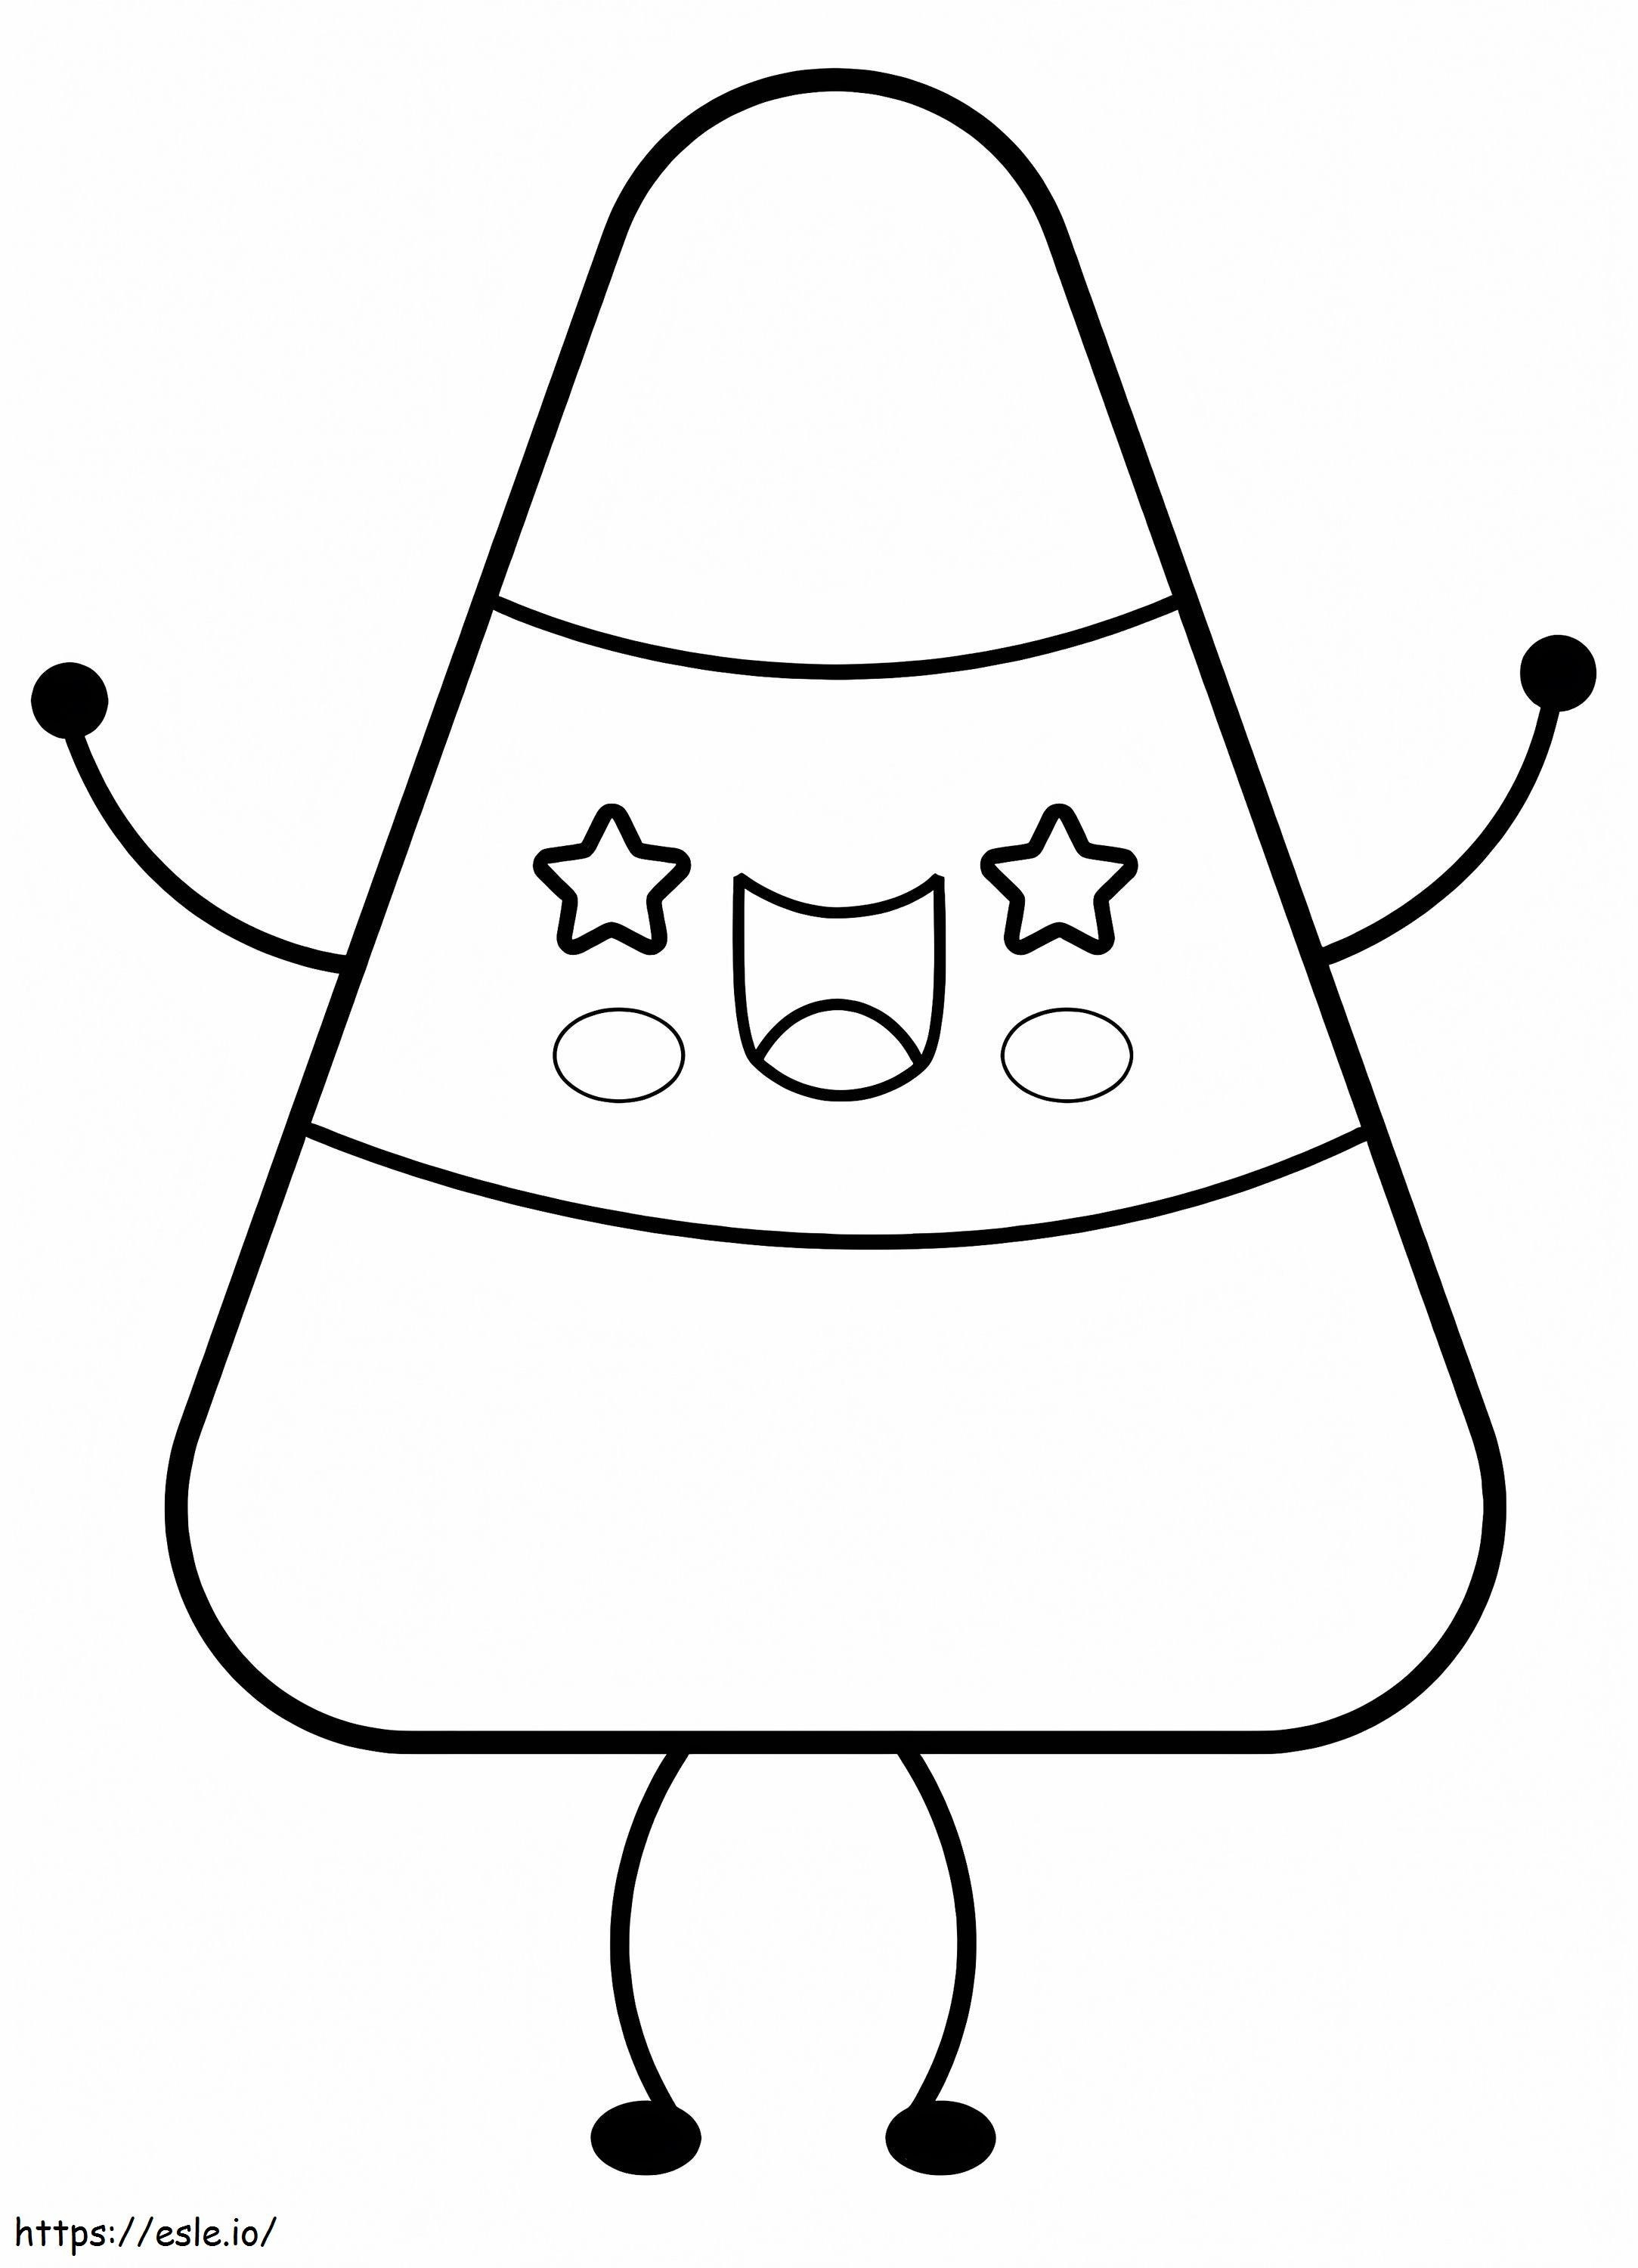 Excited Candy Corn coloring page